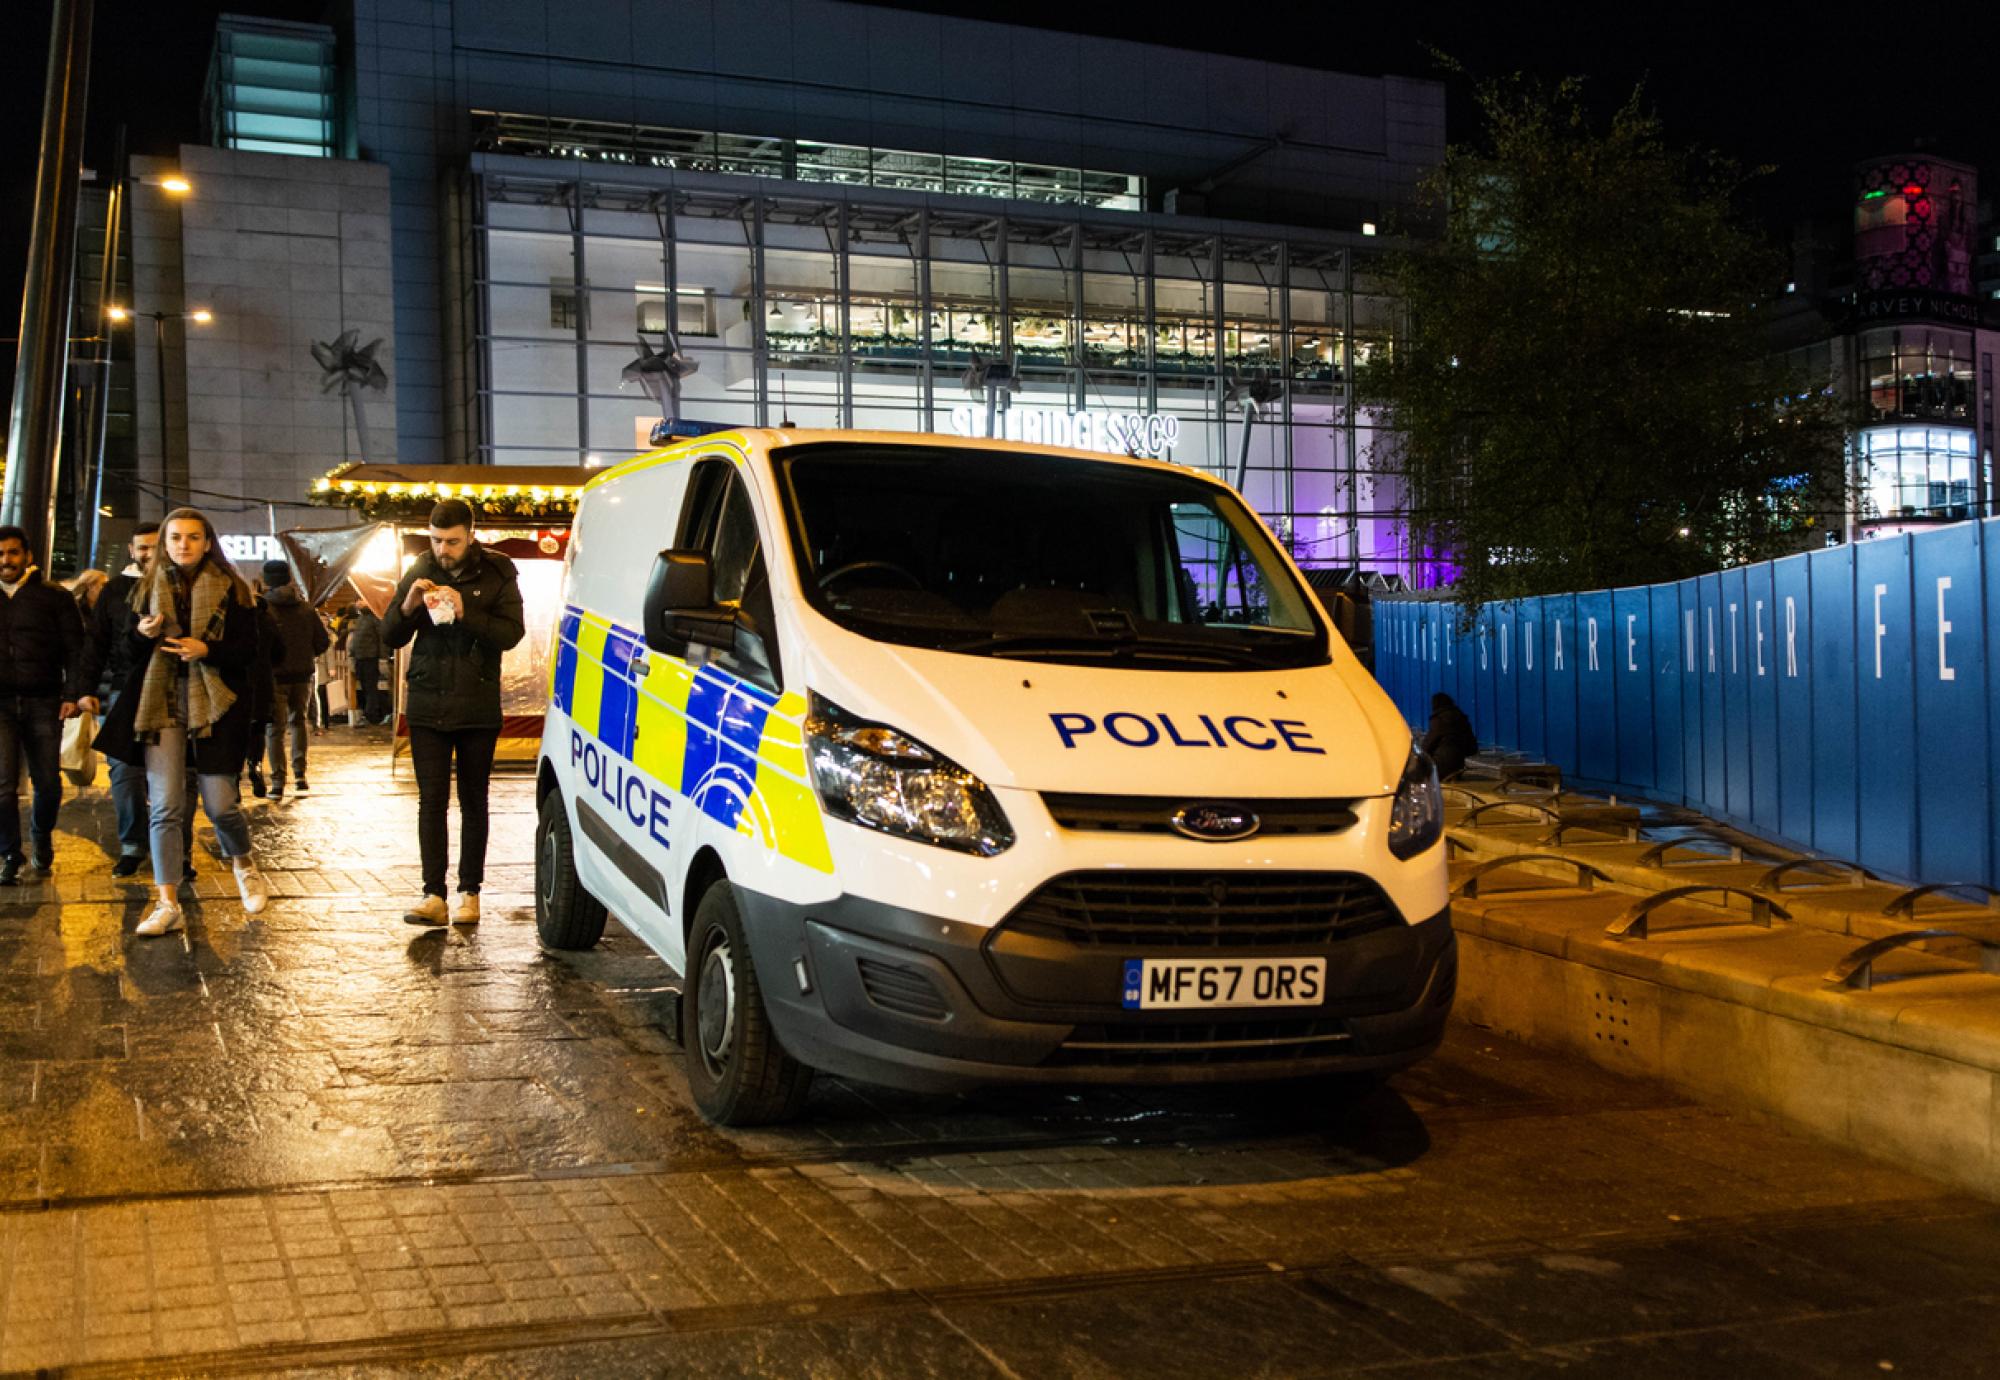 UK Police van parked in Manchester